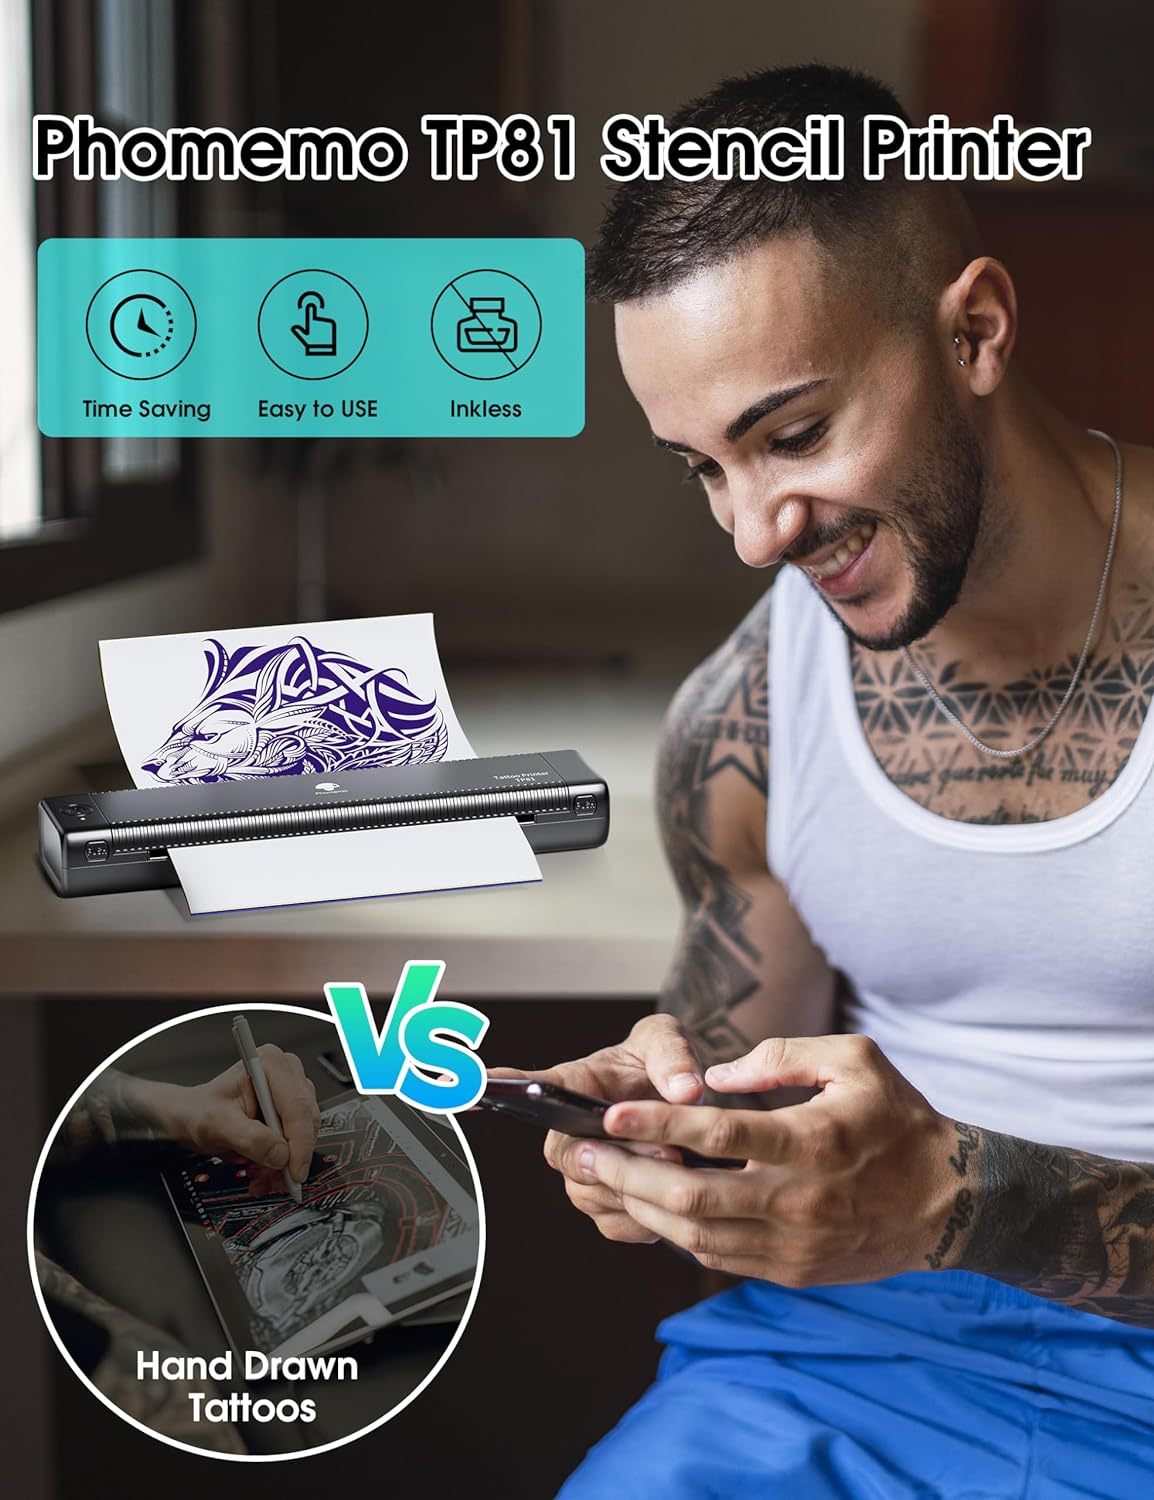 Phomemo TP81 (Upgraded) Wireless Tattoo Stencil Printer, Thermal Tattoo Printer with 10pcs Transfer Paper, Tattoo Printer for Tattoo Artists & Beginners, Compatible with Tablet,Smartphone & PC